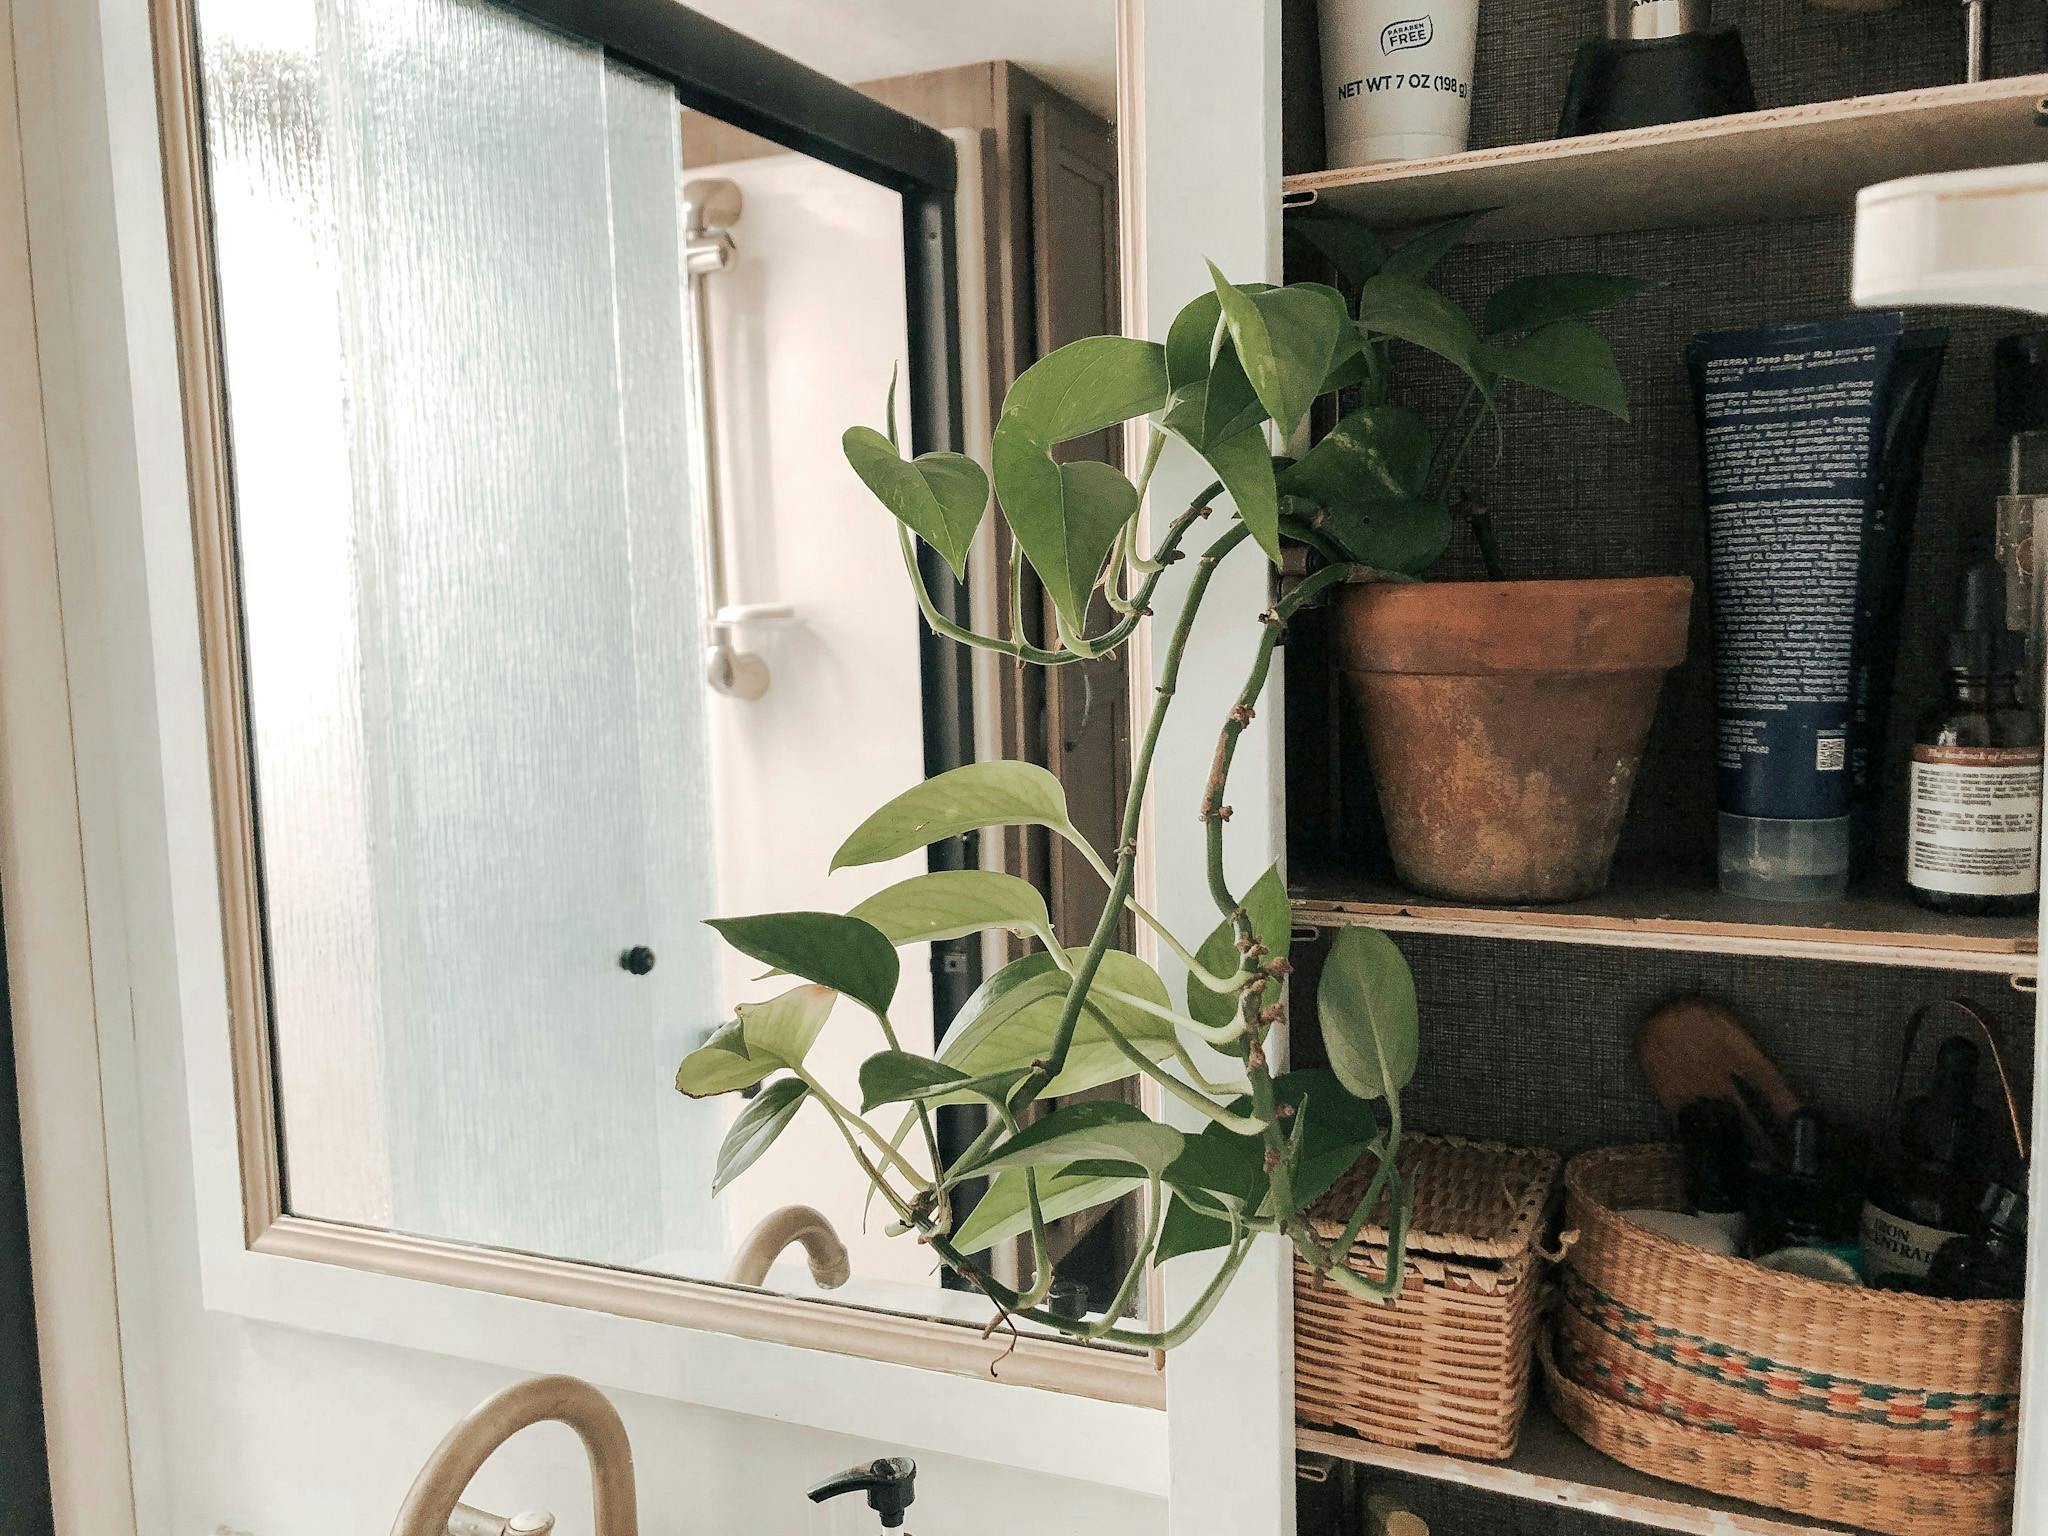 The bathroom mirror and a plant inside Bibi and JC Barringer's KZ Durango Gold fifth wheel.